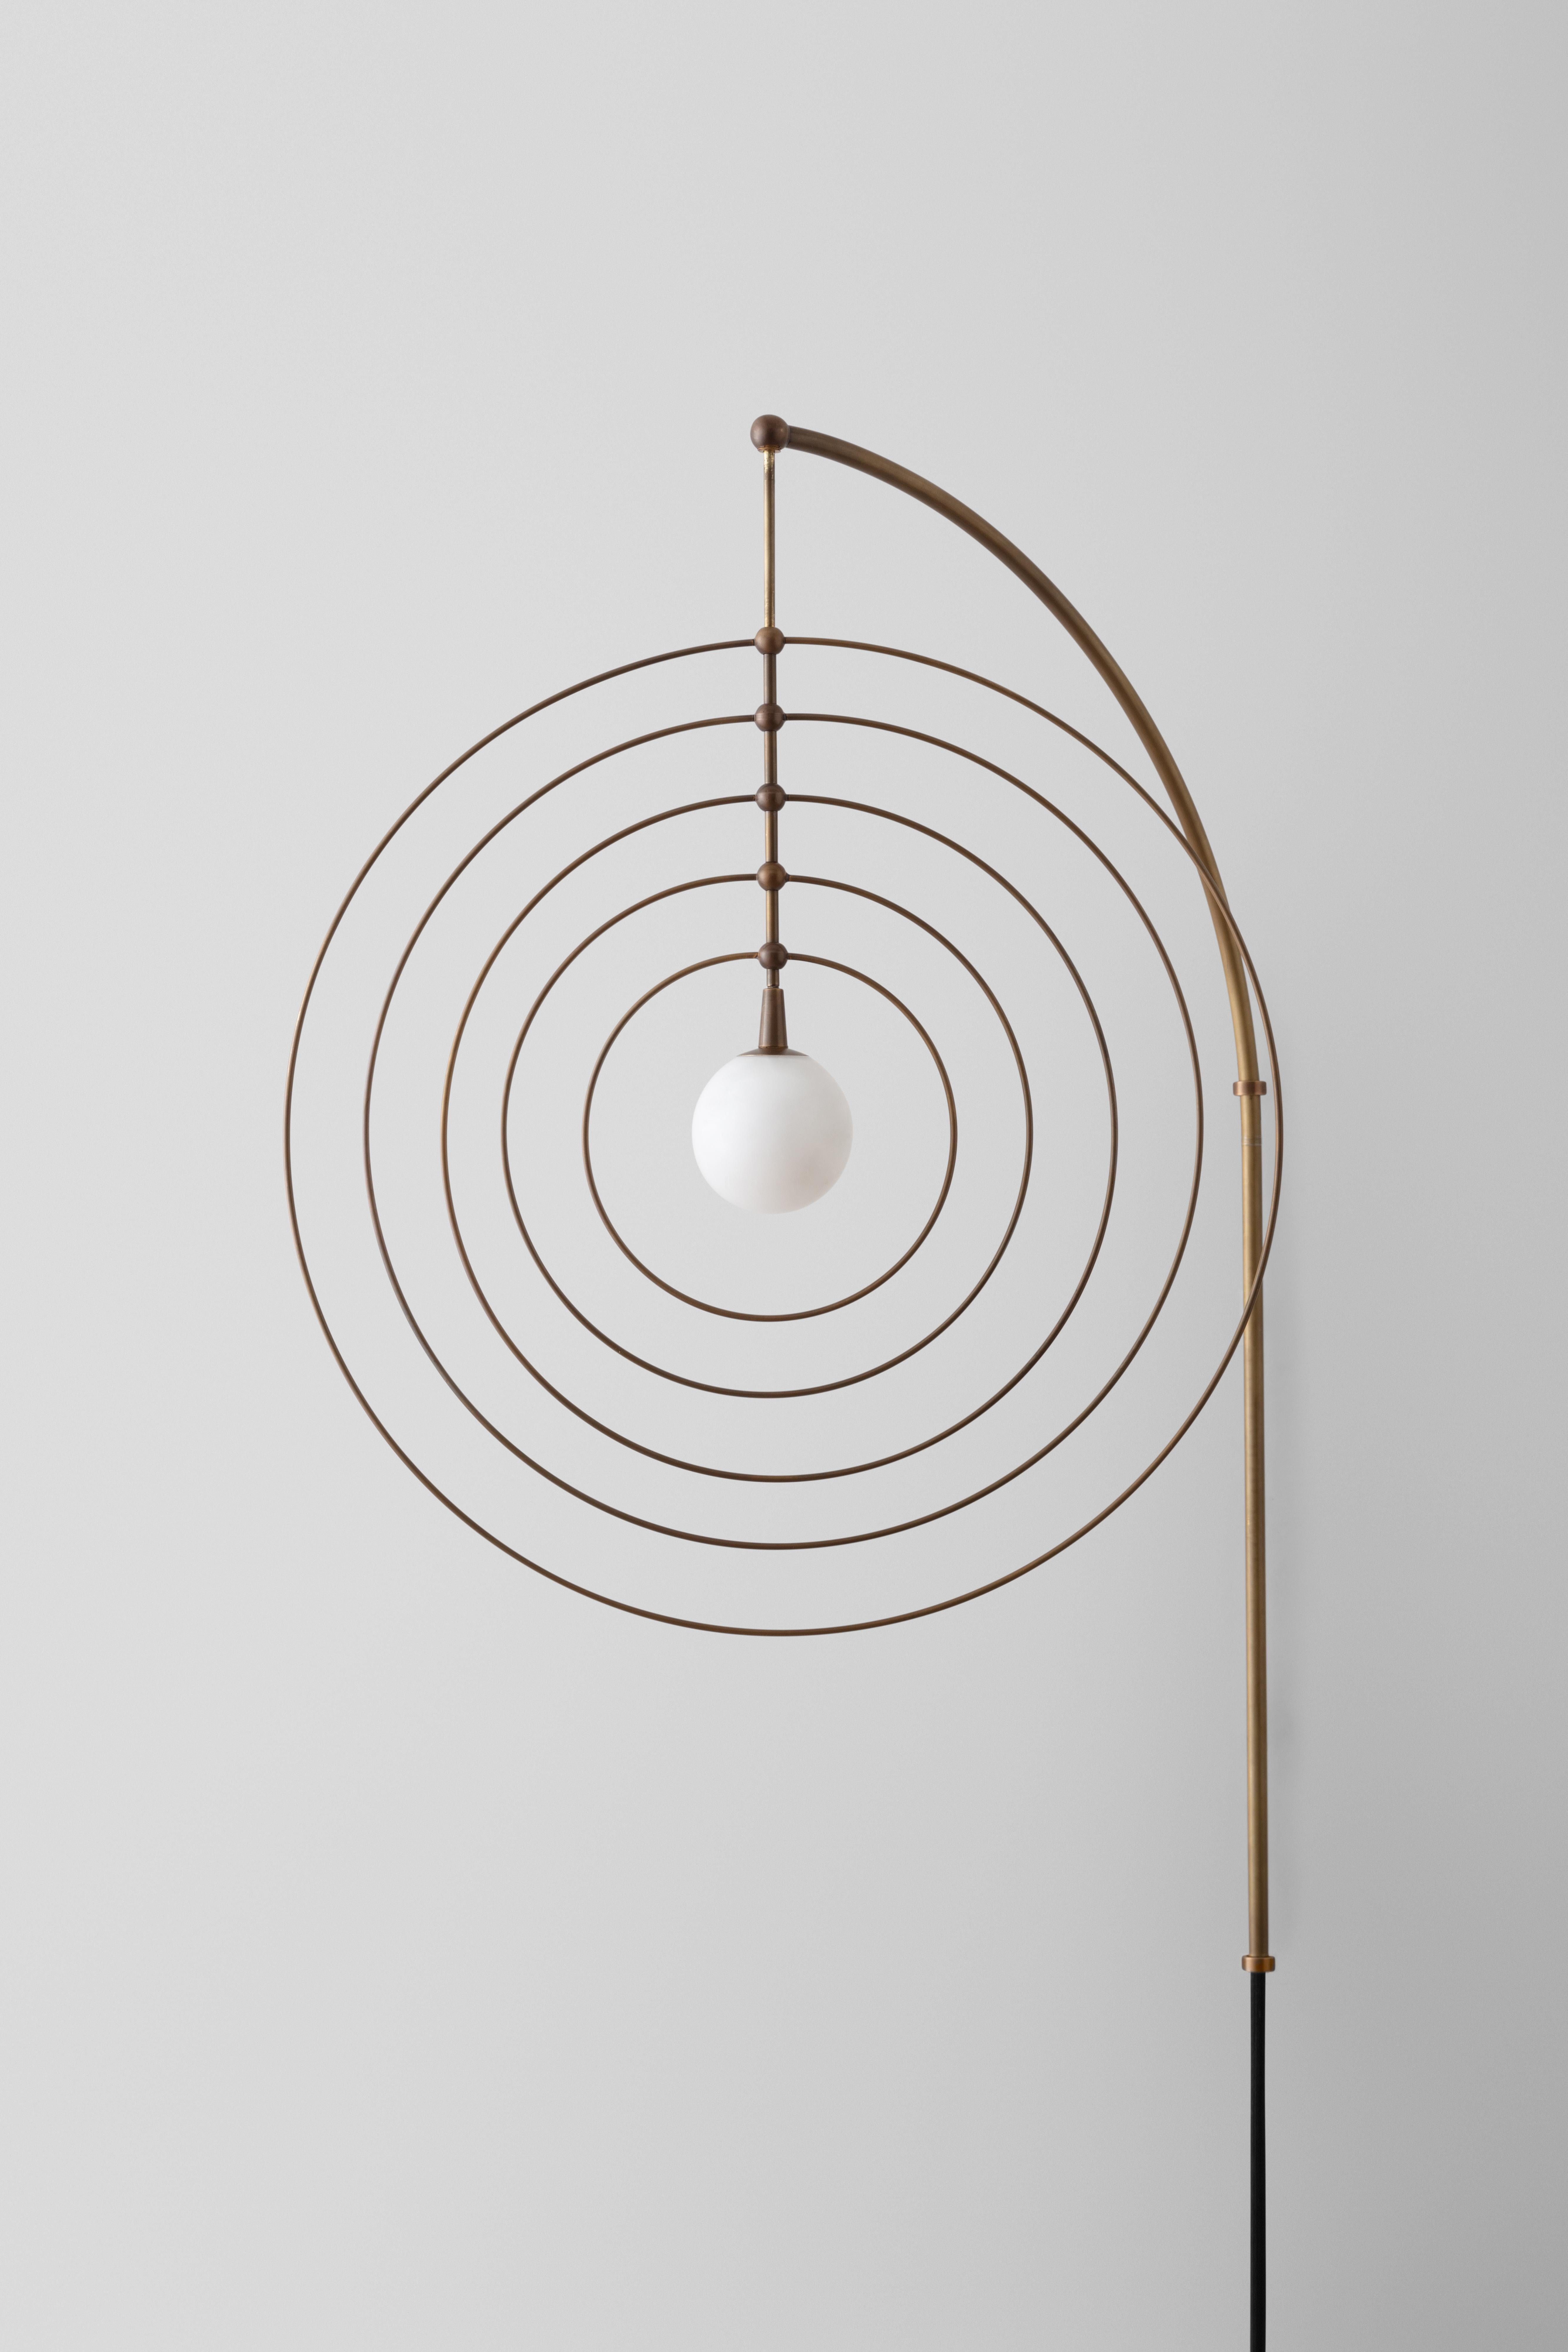 The Mobile series combine sculpture with lighting, invoking motifs from atomic models and the space age. The concentric rings can be spun and reconfigured, inviting play and whimsy. The central orb illuminates the brass rings, which are